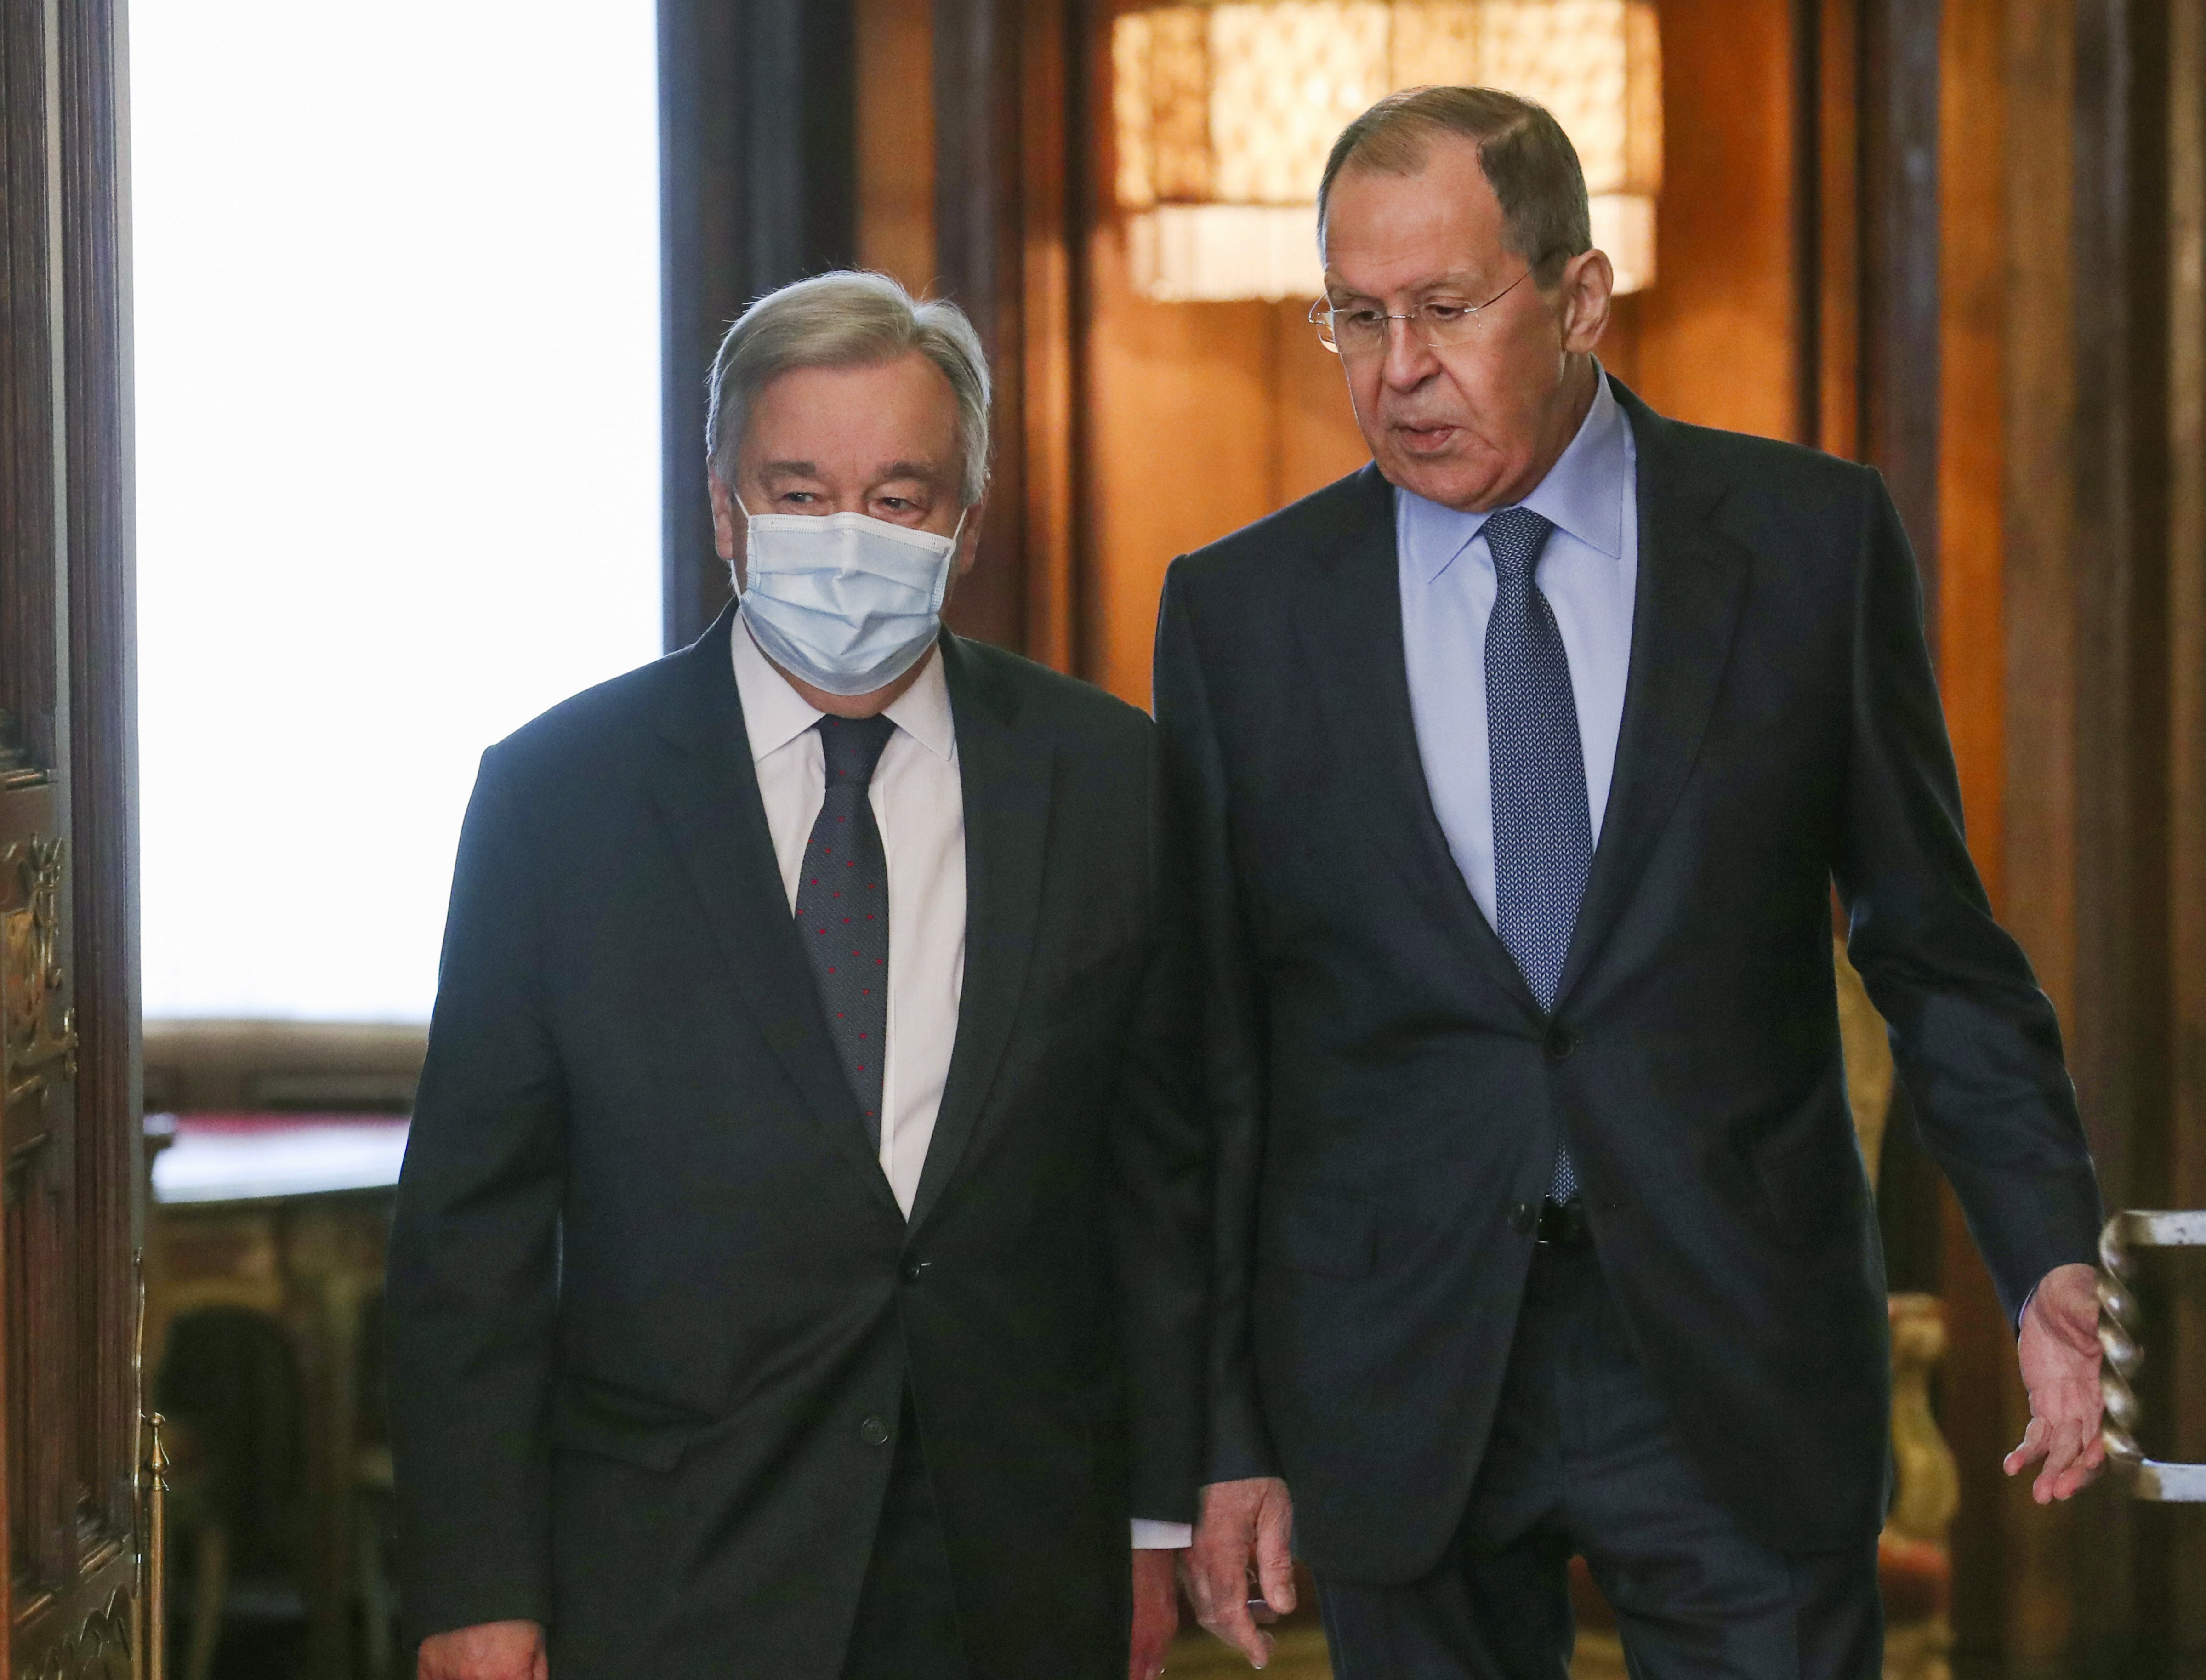 UN chief António Guterres calls for cease-fire on Moscow visit